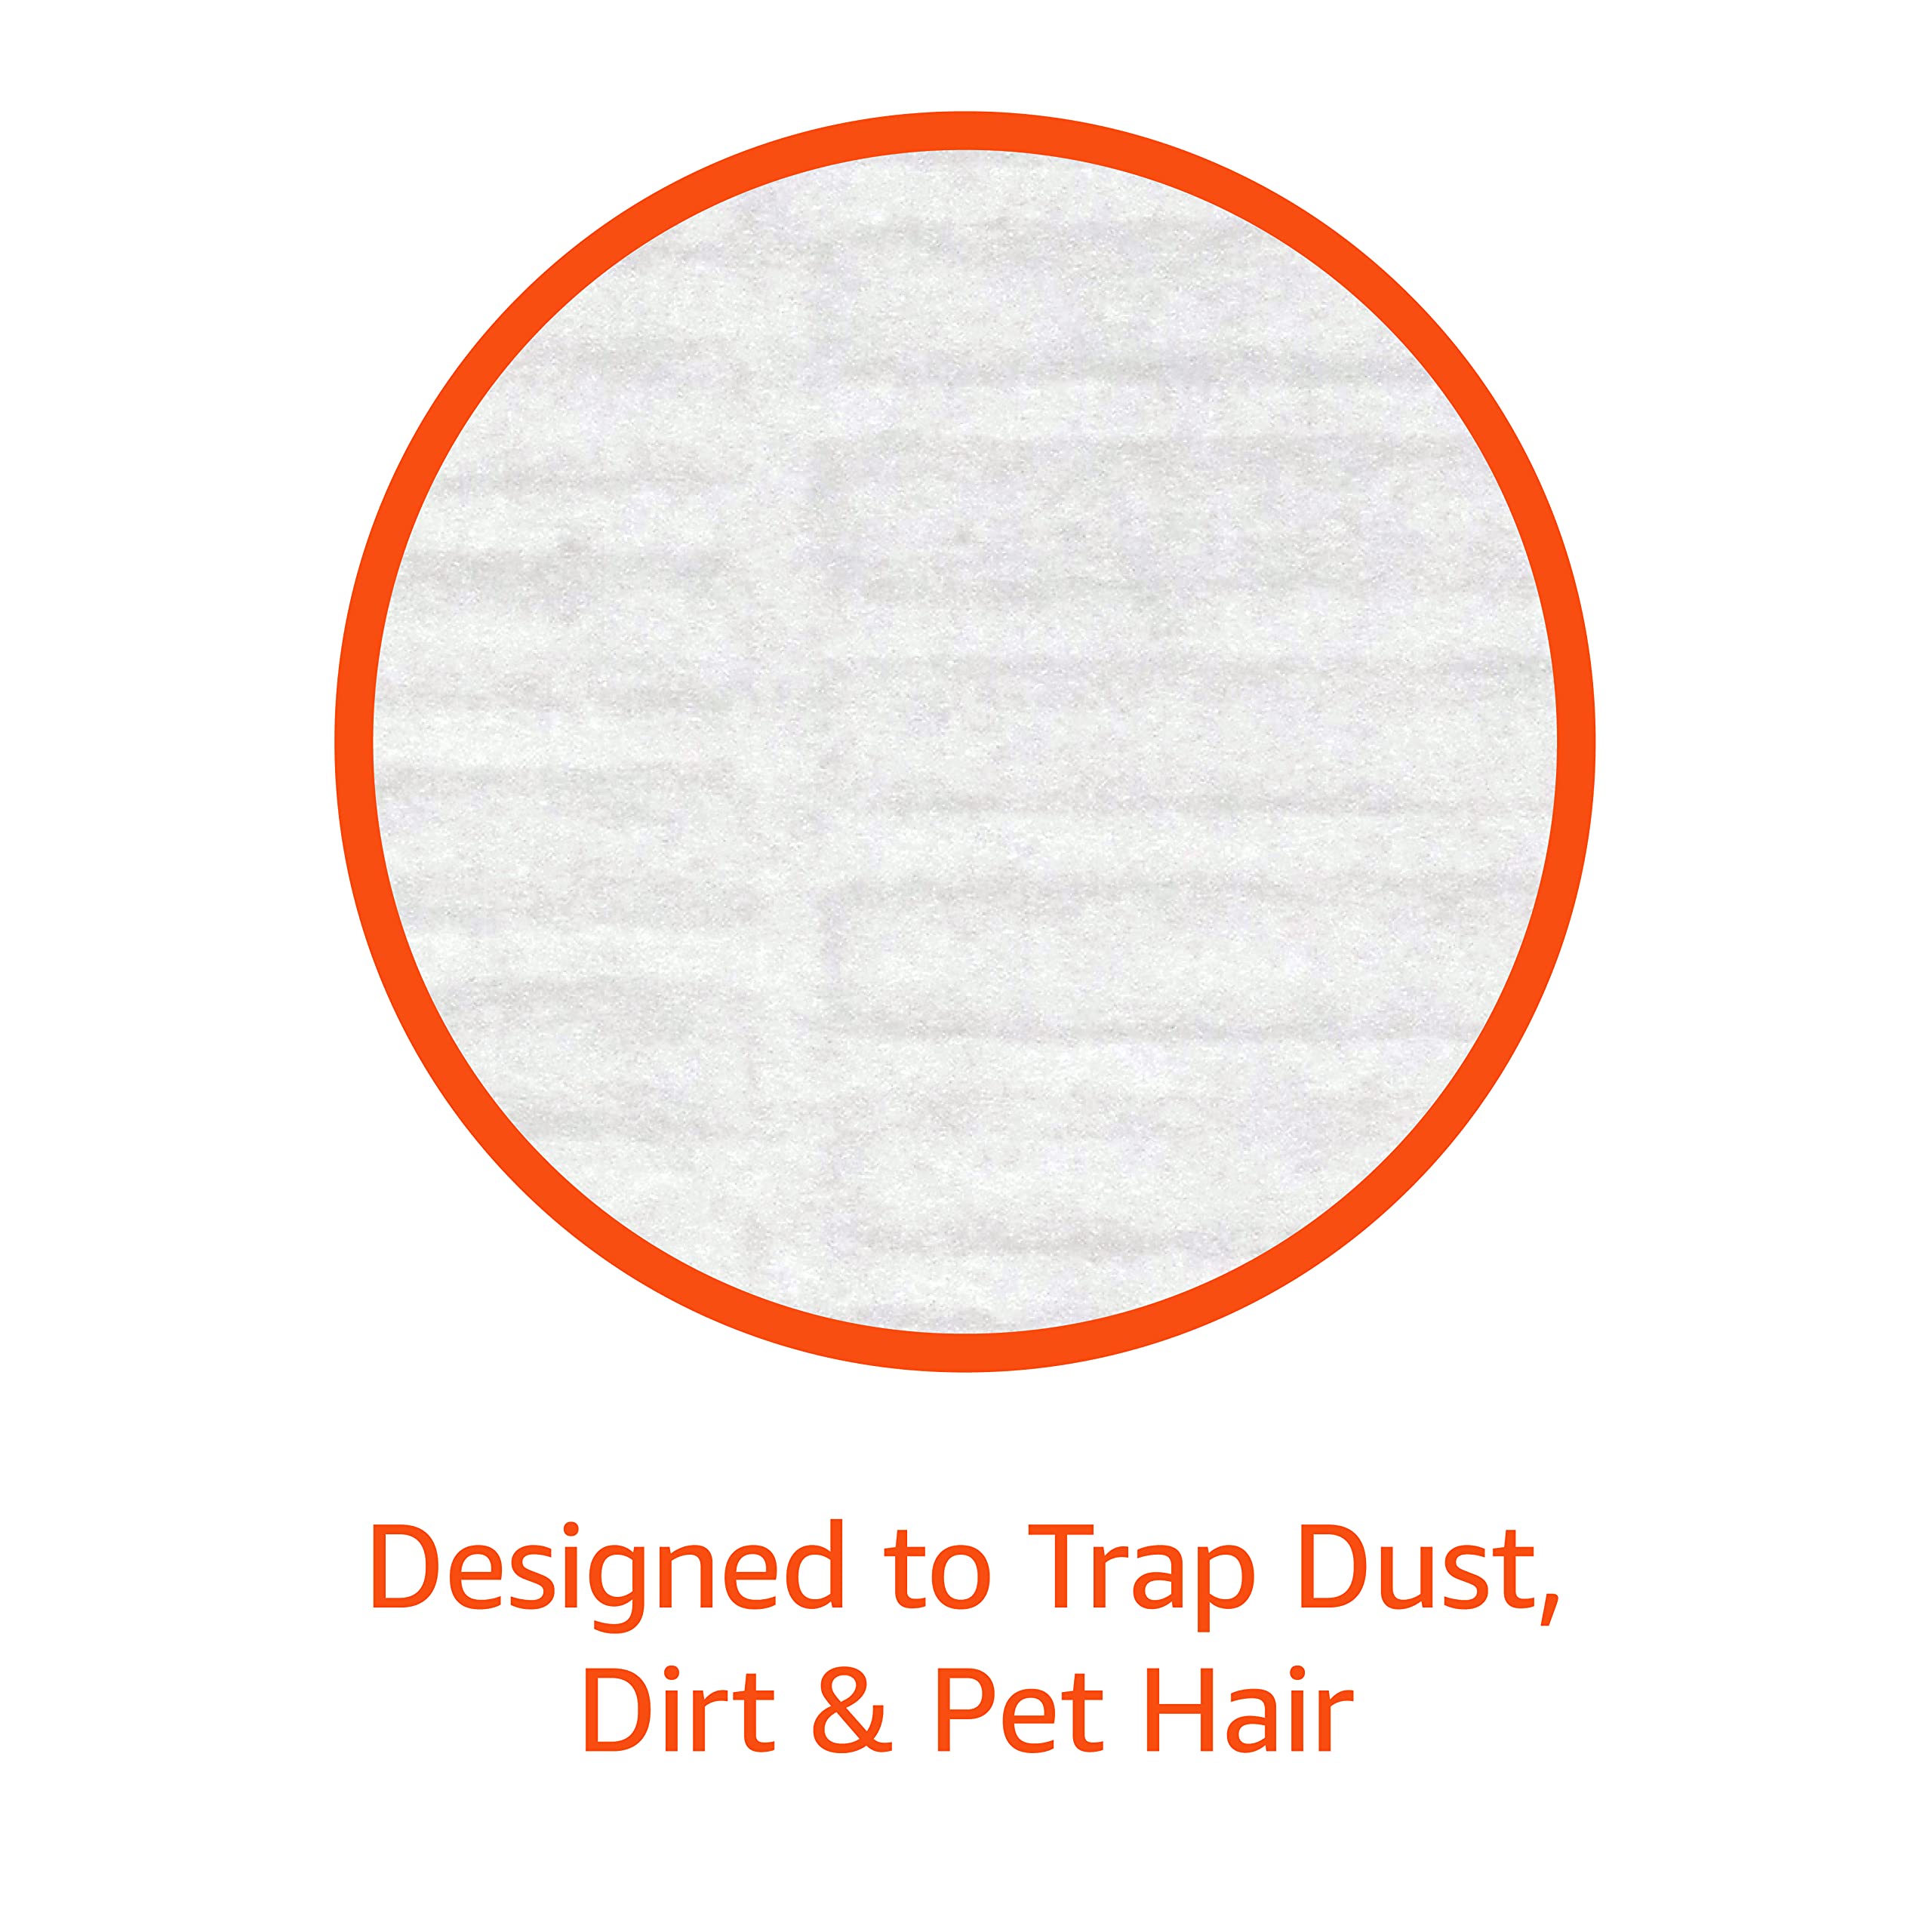 Amazon Basics Dry Floor Cleaning Cloths to Trap Dust, Dirt, Pet Hair, 64 Count (Previously Solimo), White, 10.4